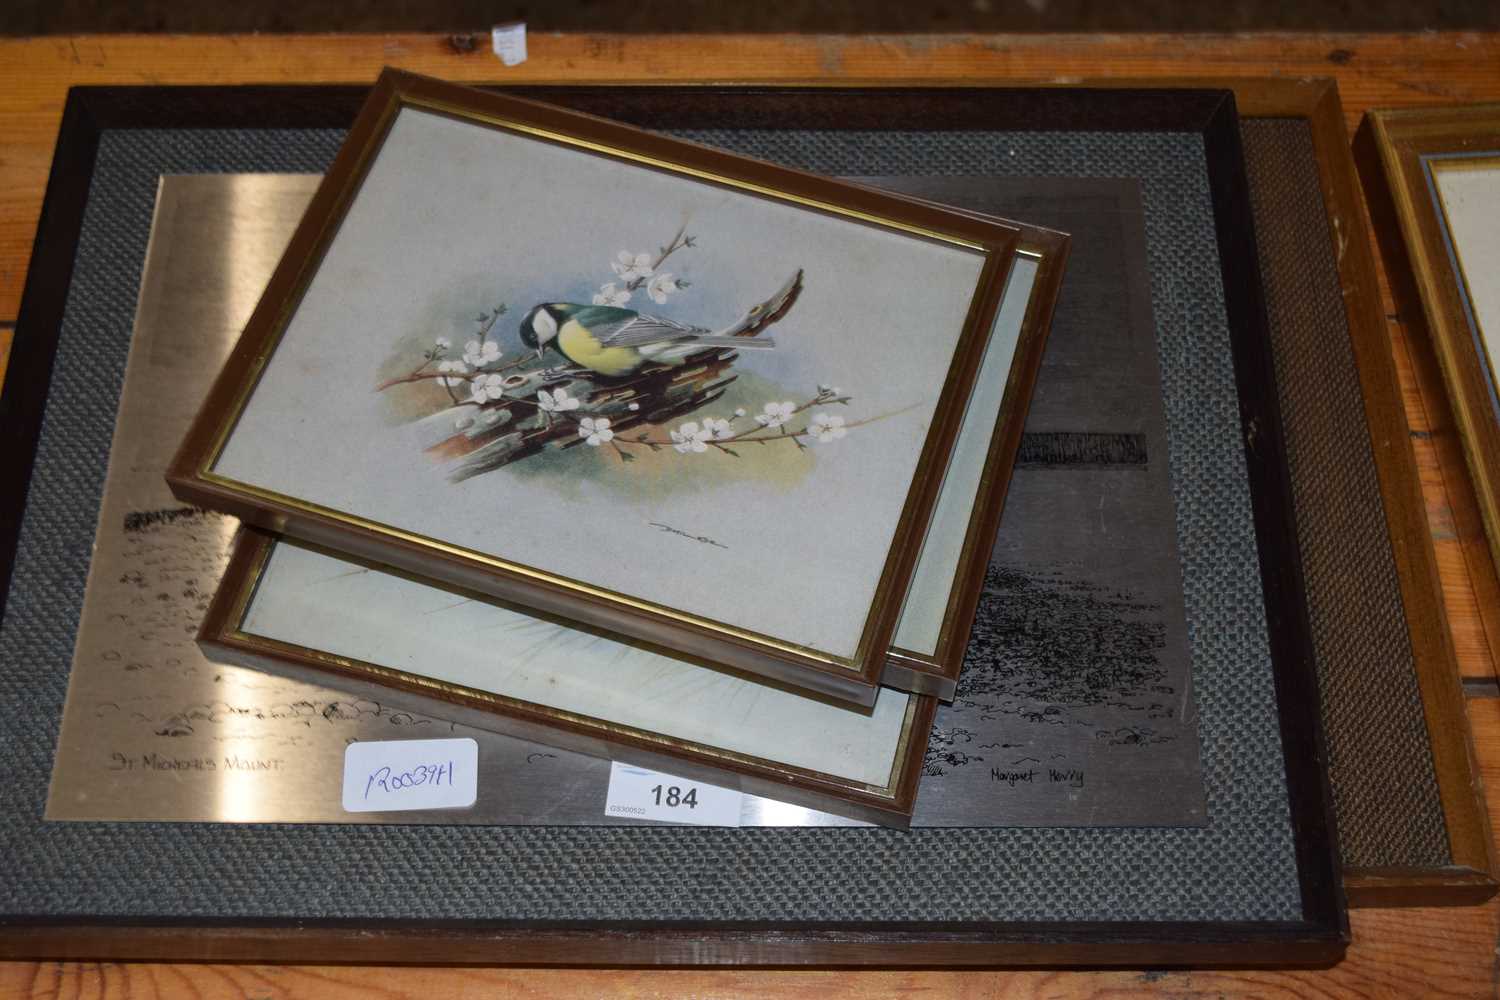 TWO STEEL PICTURES TOGETHER WITH THREE FRAMED PRINTS OF BIRDS